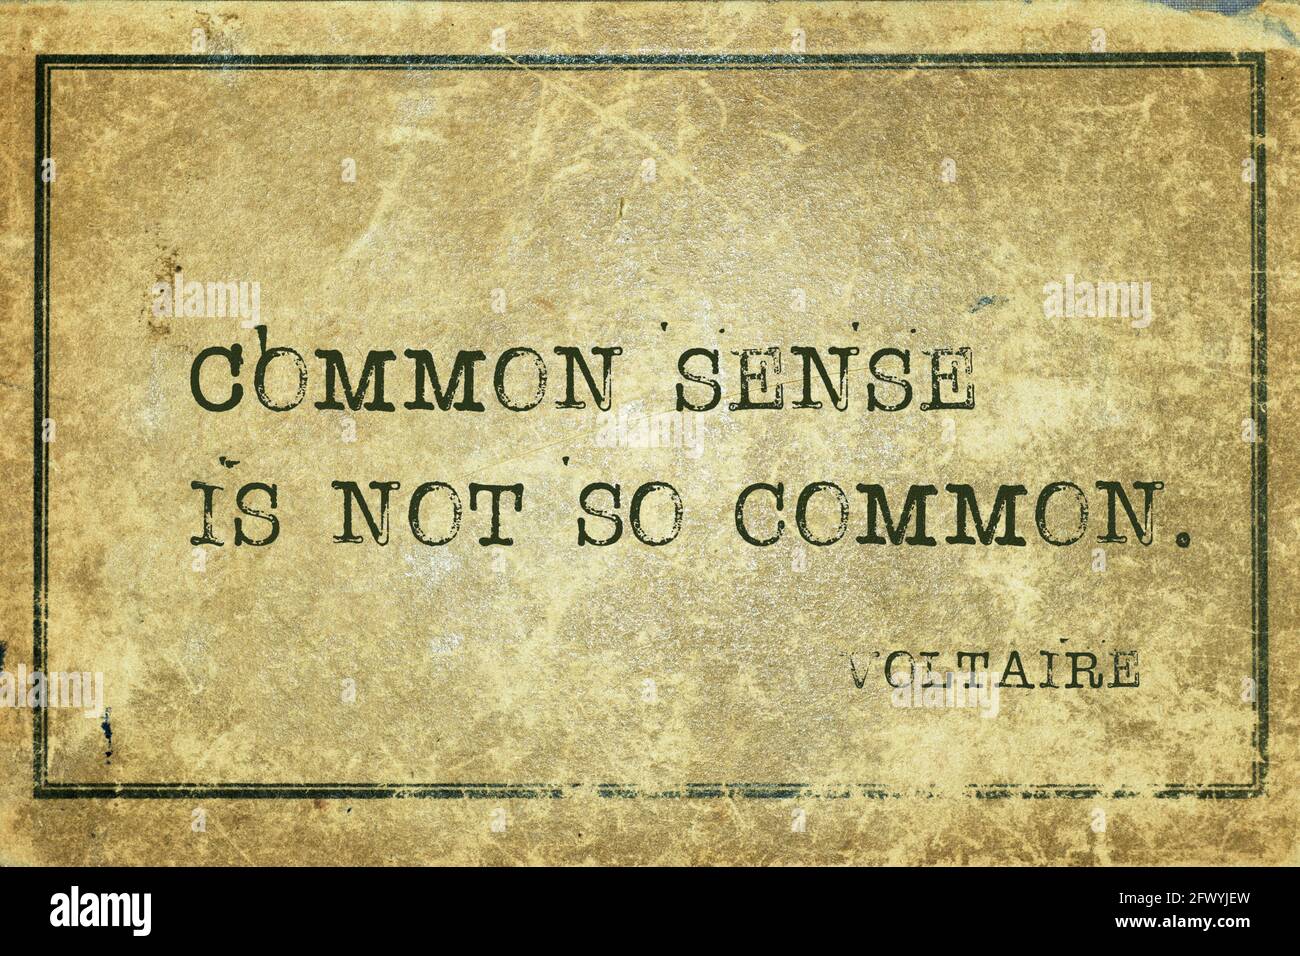 Common sense is not so common - ancient French philosopher and writer Voltaire quote printed on grunge vintage cardboard Stock Photo